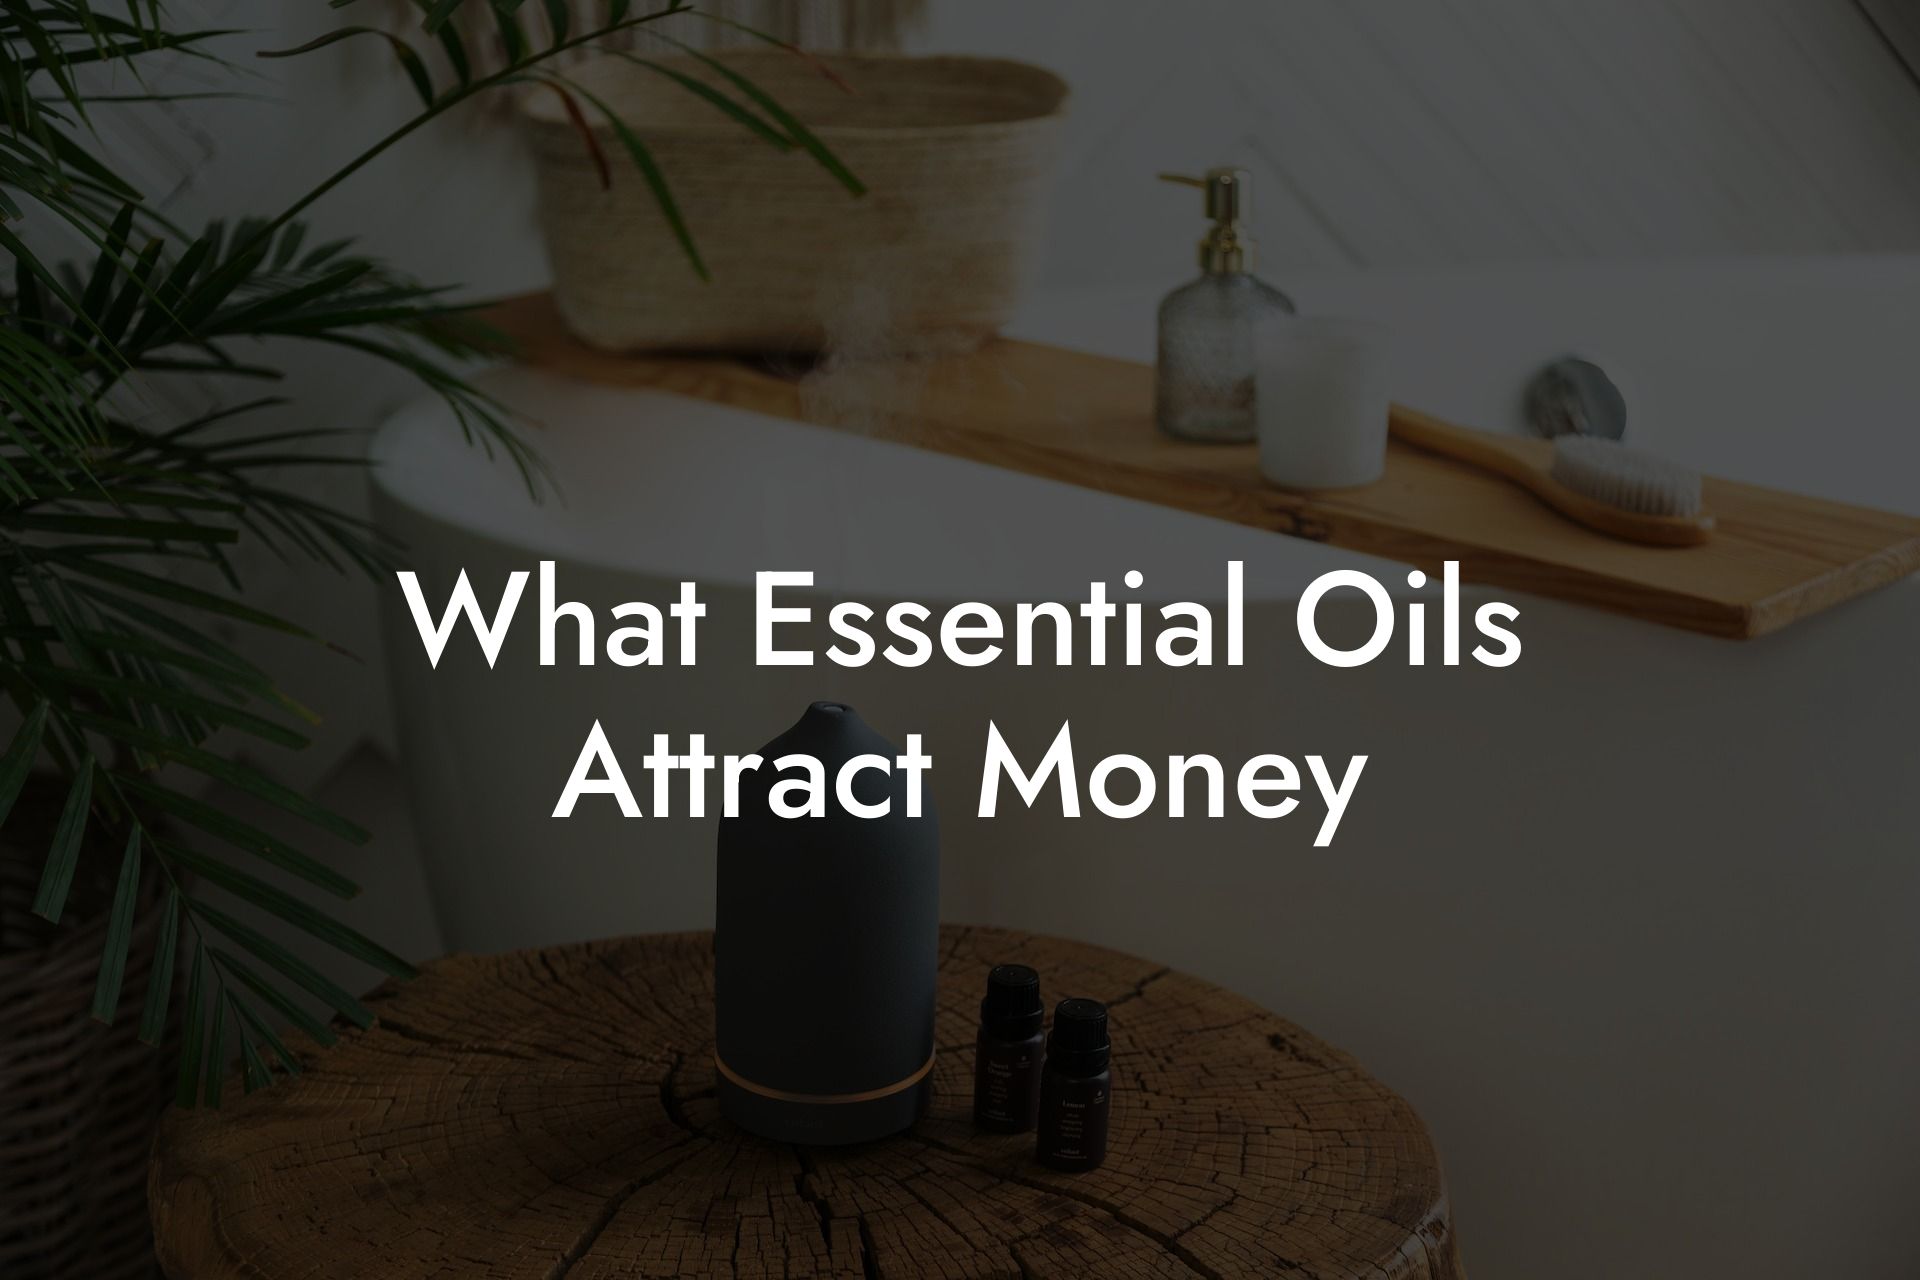 What Essential Oils Attract Money